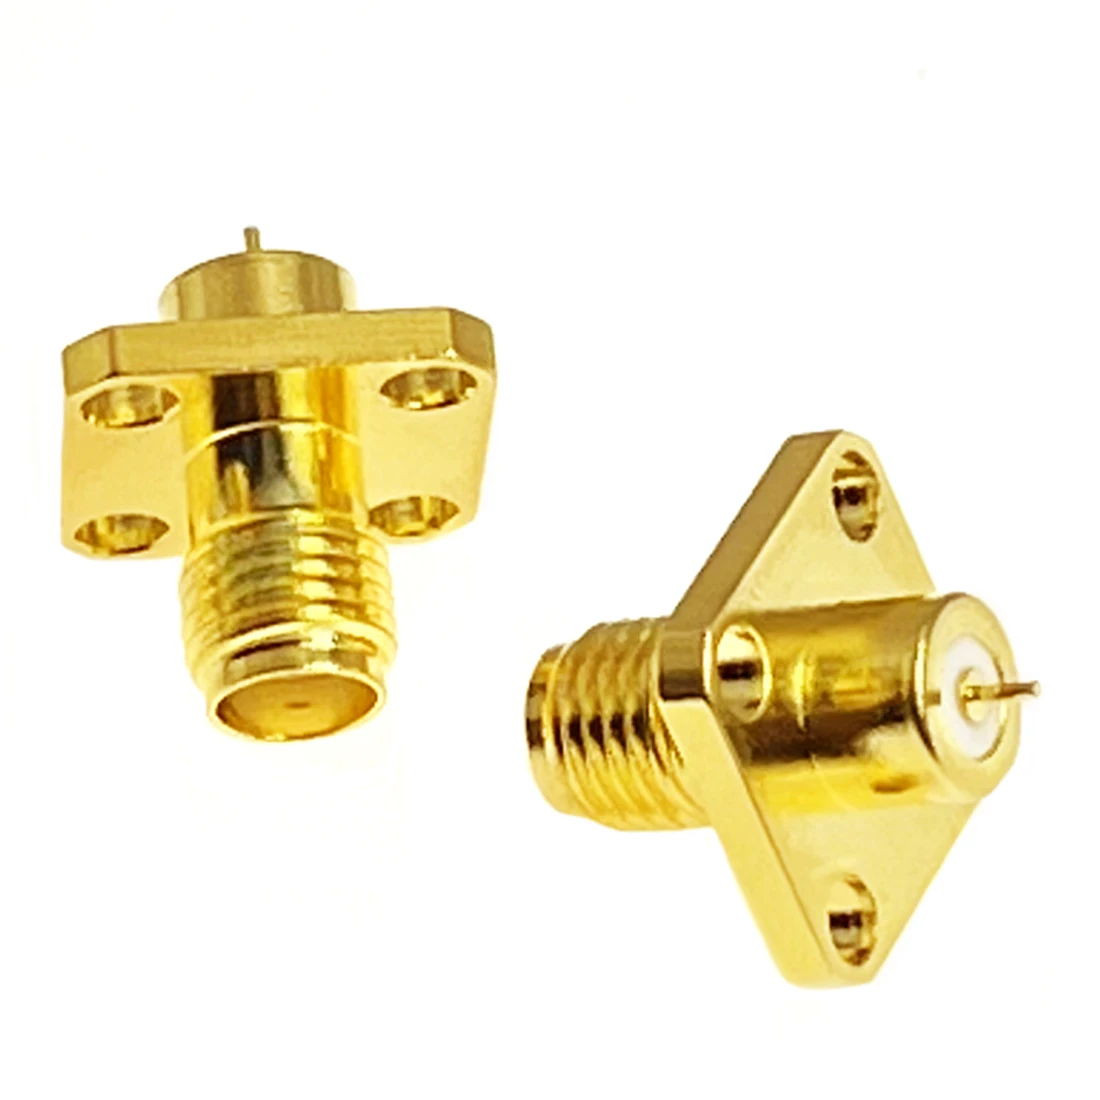 

1pc SMA Female Jack RF Coax Connector 4-Hole Flange Solder Post Straight Pillars Goldplated NEW wholesale SMA Weld Terminal